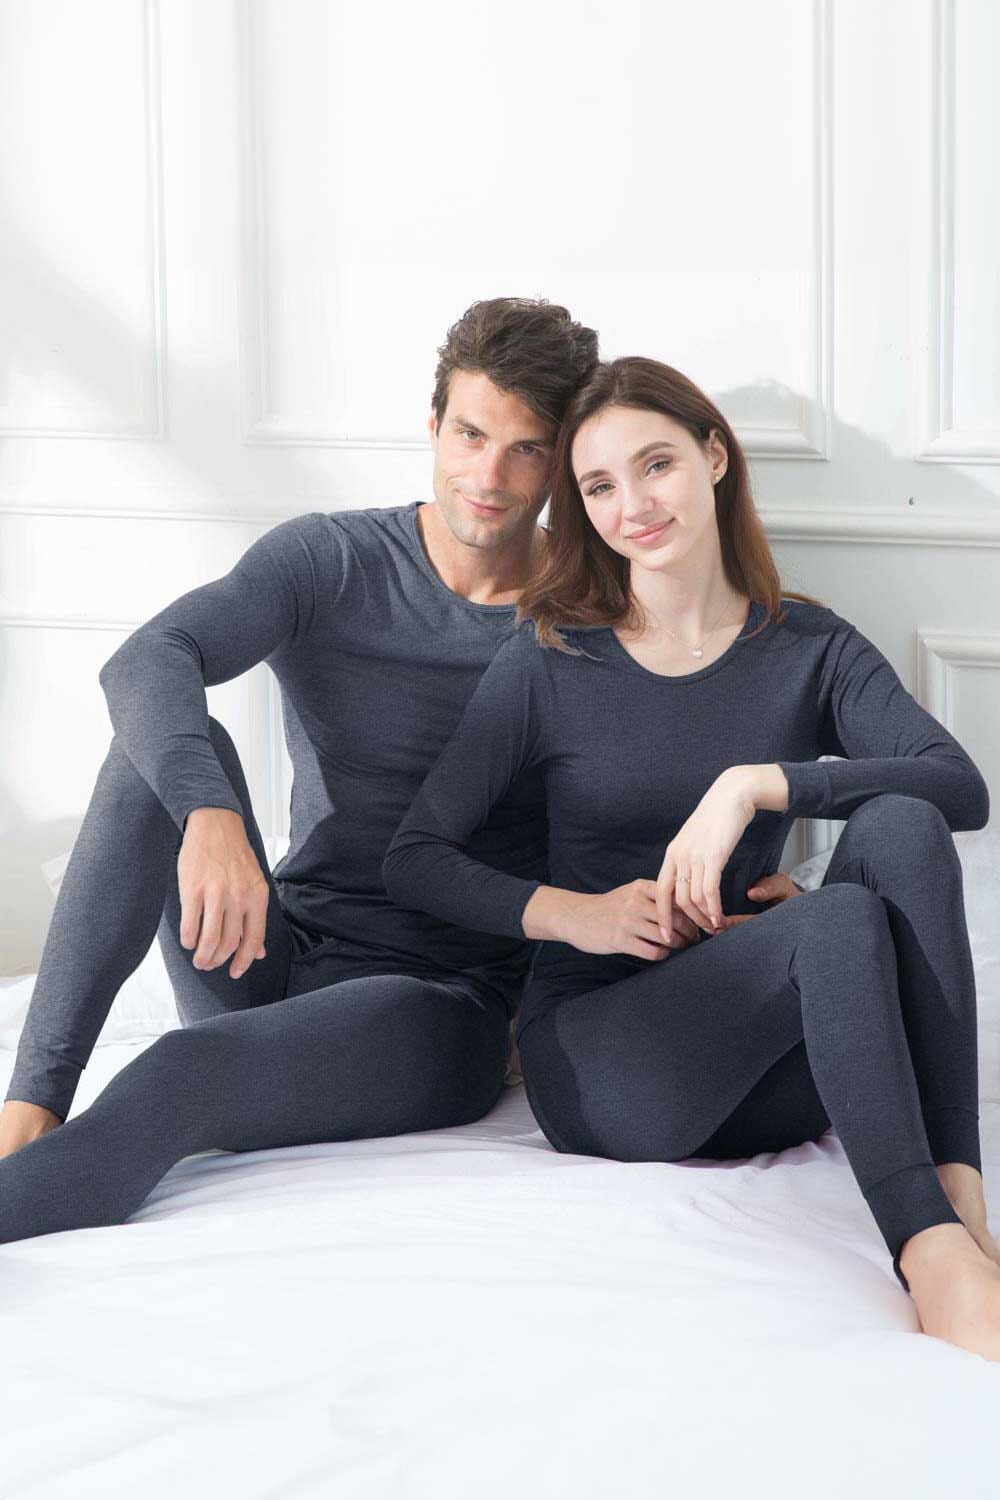 Cheap Unisex Winter Thermal Suit With Fleece Inner, Thermal Undershirt And Thermal  Tights Underwear